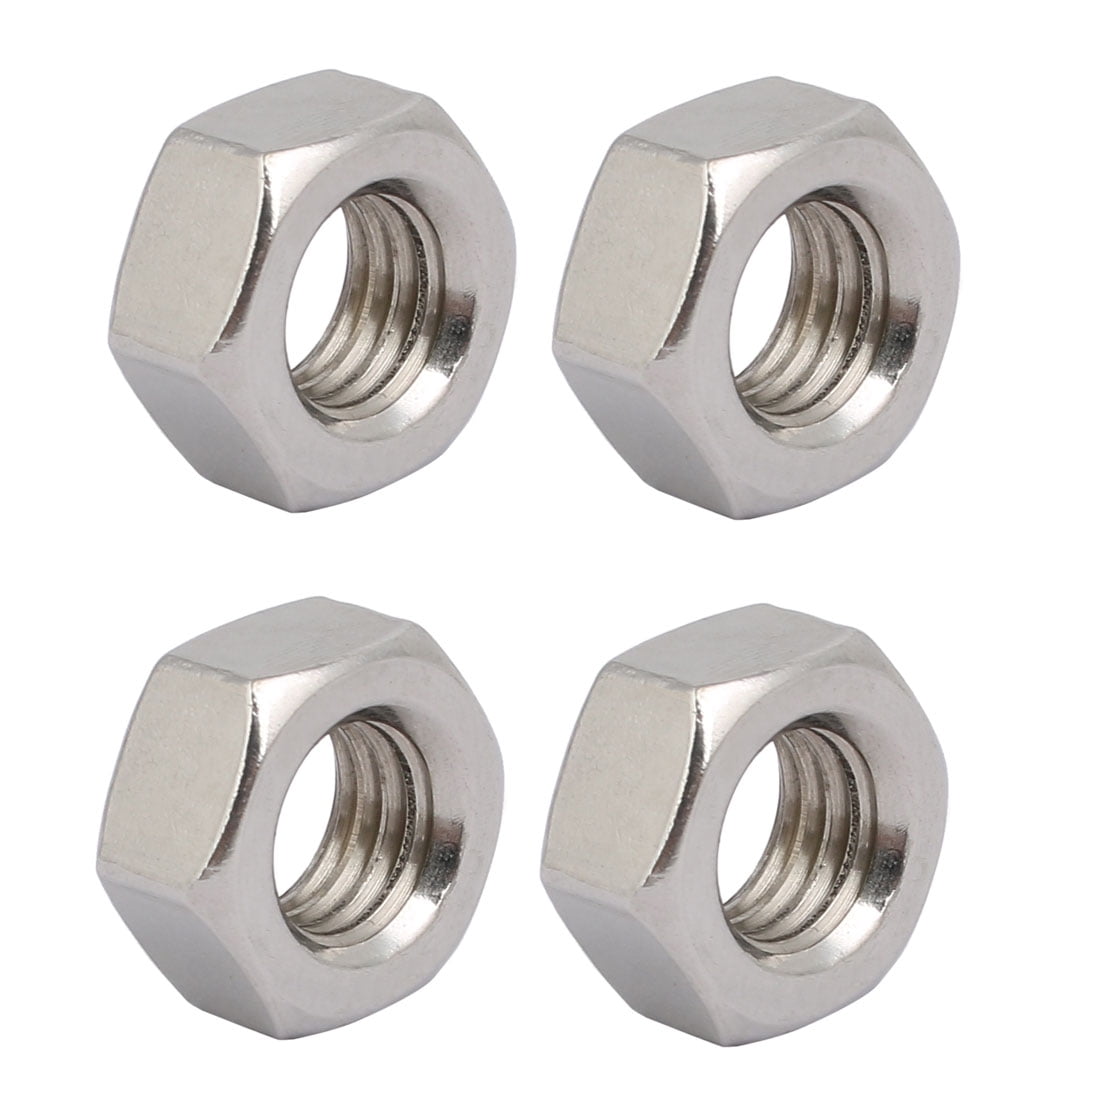 4pcs M12 x 1.5 mm Pitch Stainless Steel Left Hand Thread Hex Nut Metric Thread